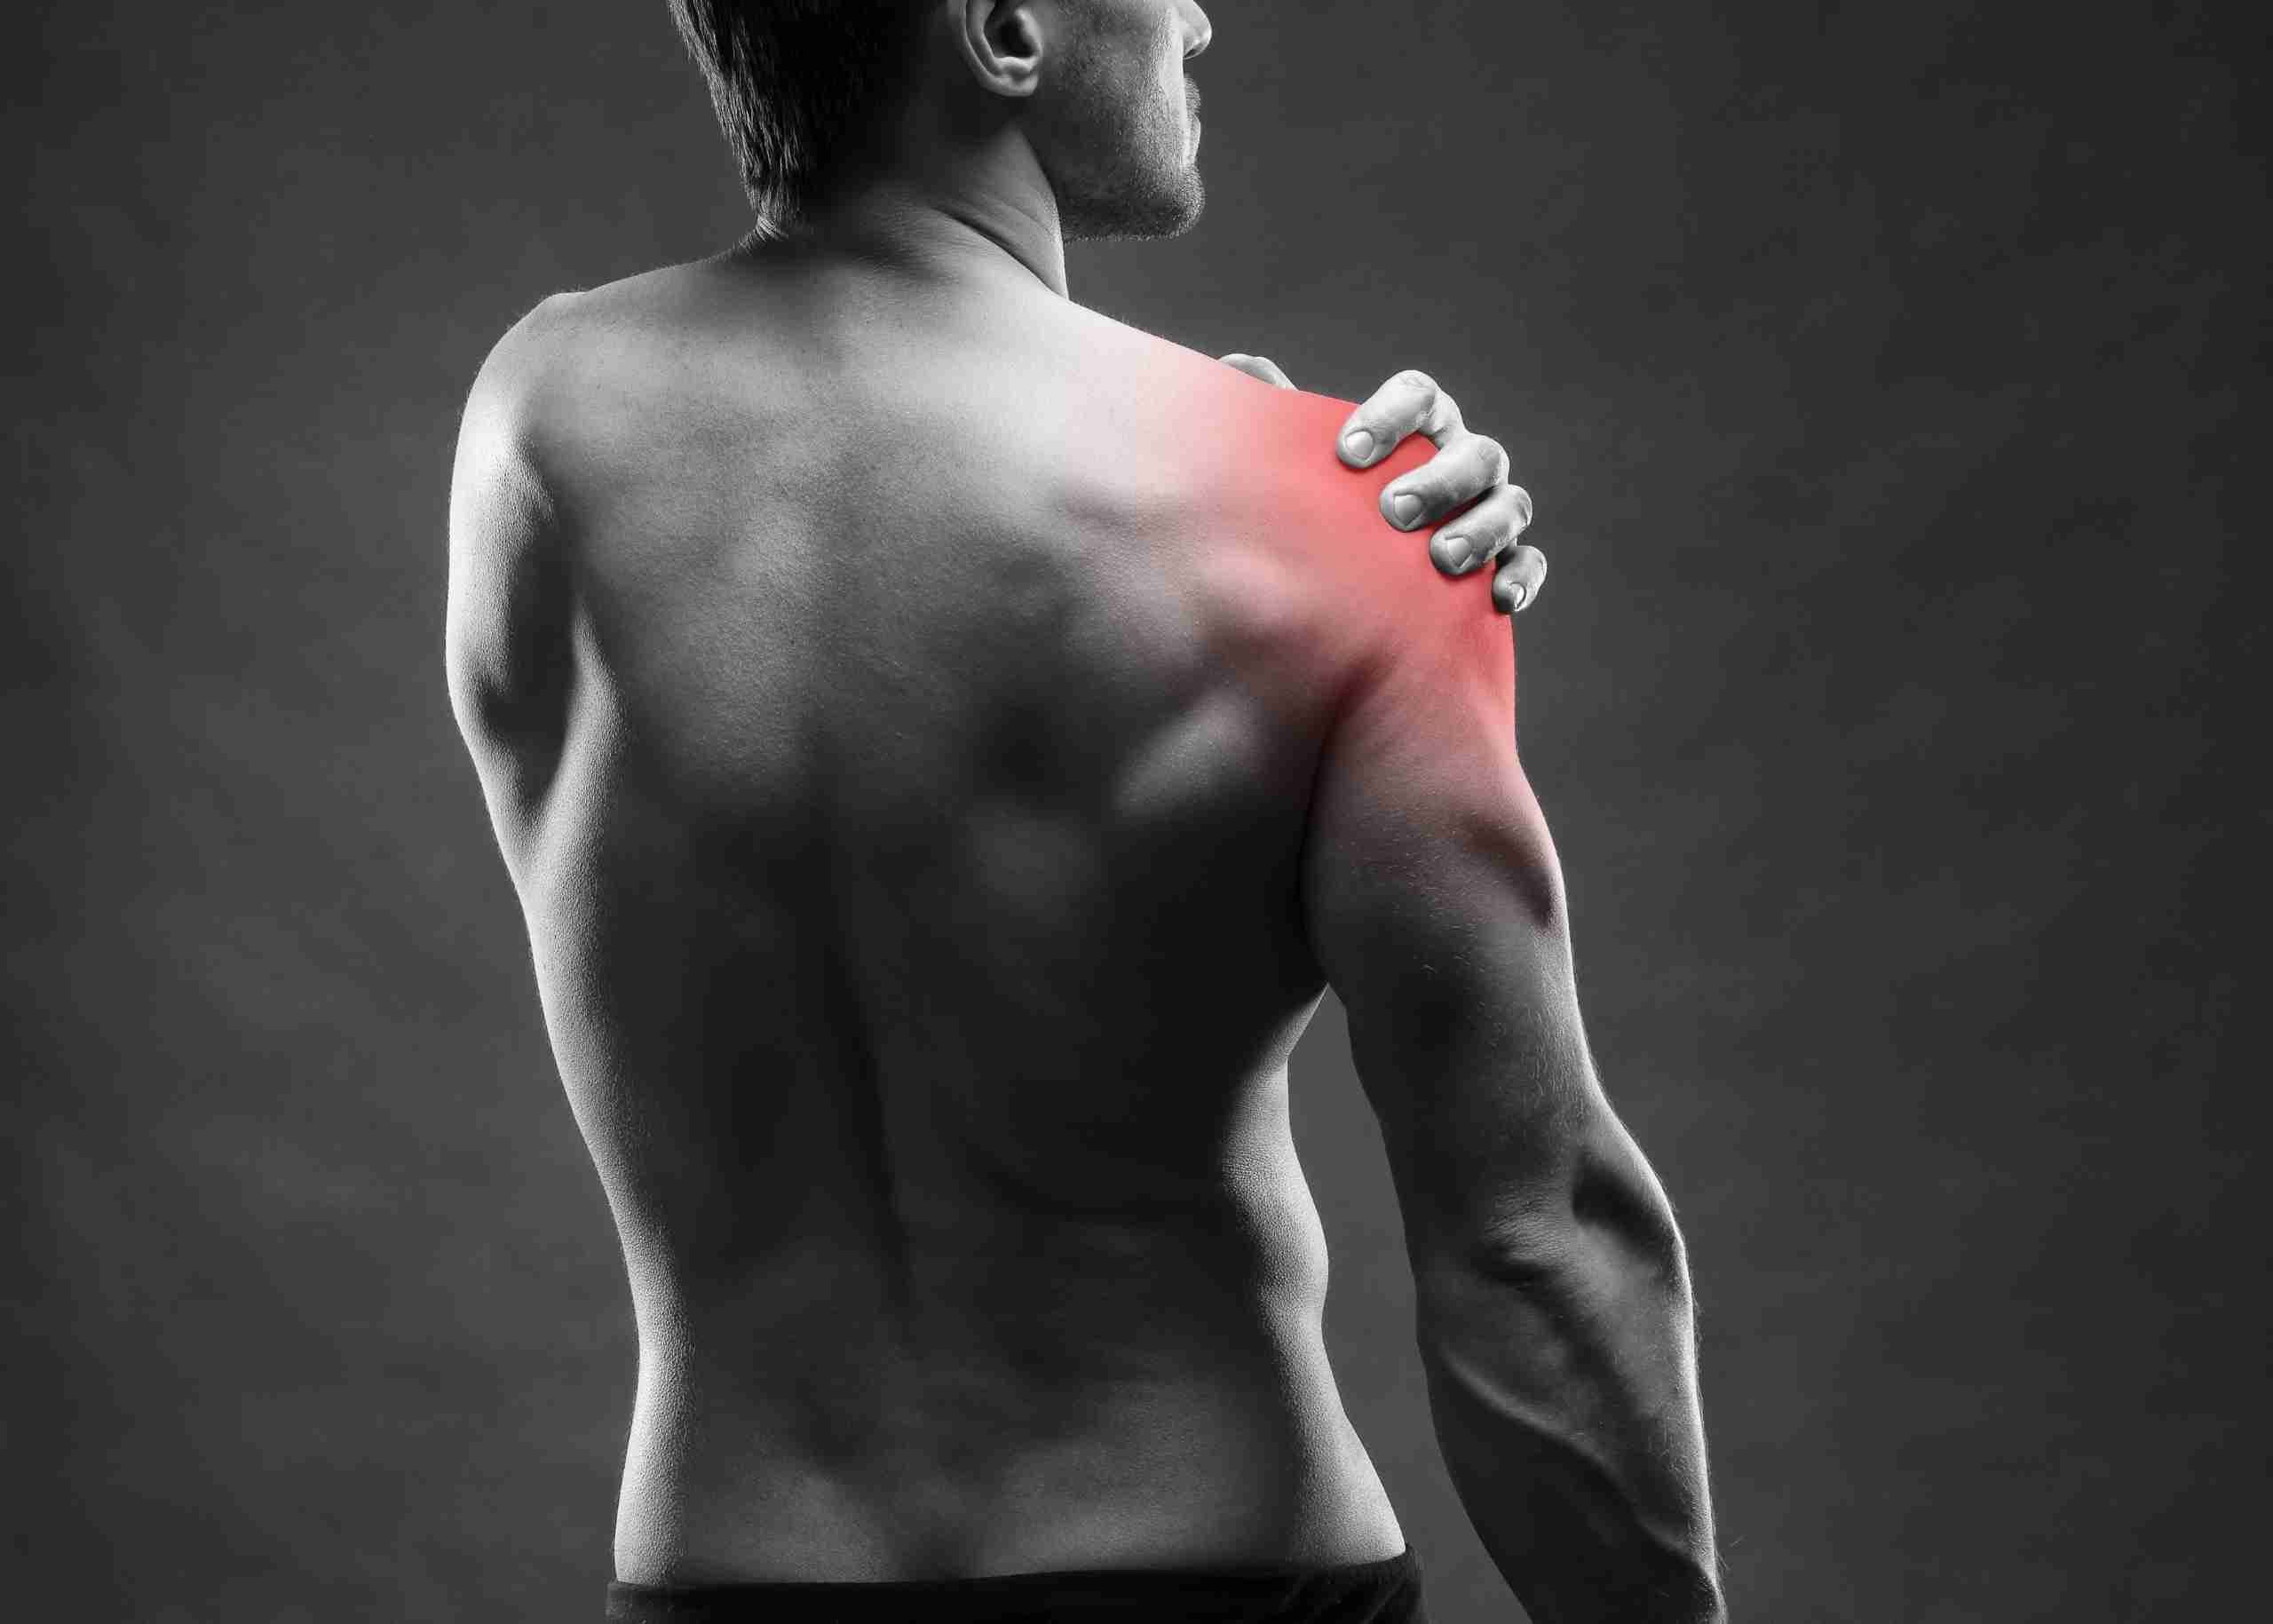 Read on and find out everything you need to know about the rotator cuff treatment!